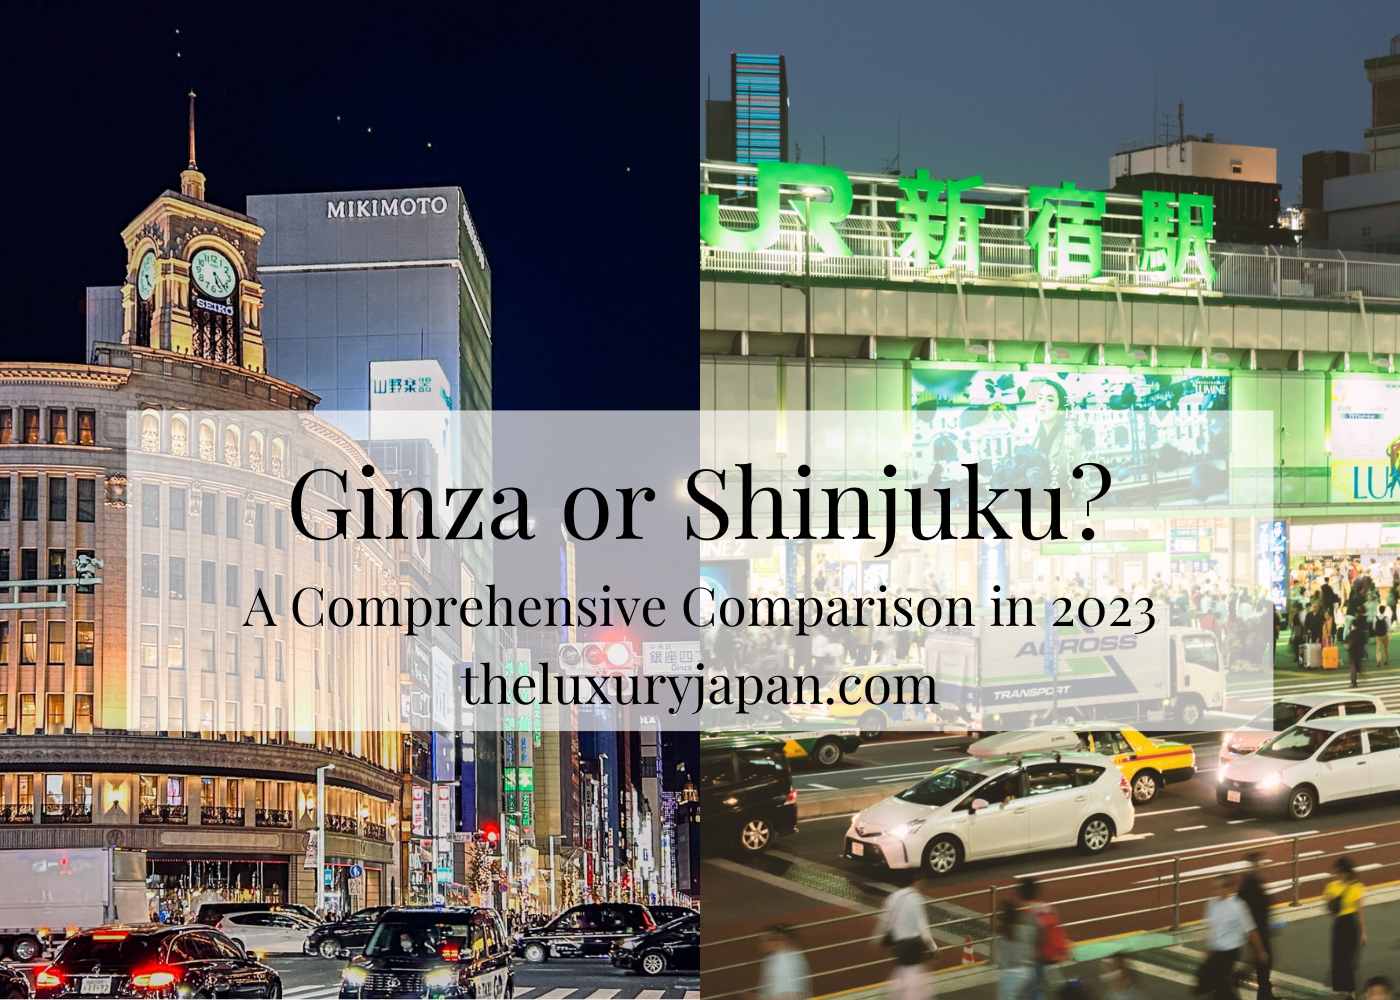 Left picture with gold building with clock and right picture with neon green lights. Both are busy areas. In the middle is a text that asks Ginza or Shinjuku? with some wordings on A Comprehensive Comparison in 2023 by theluxuryjapan.com